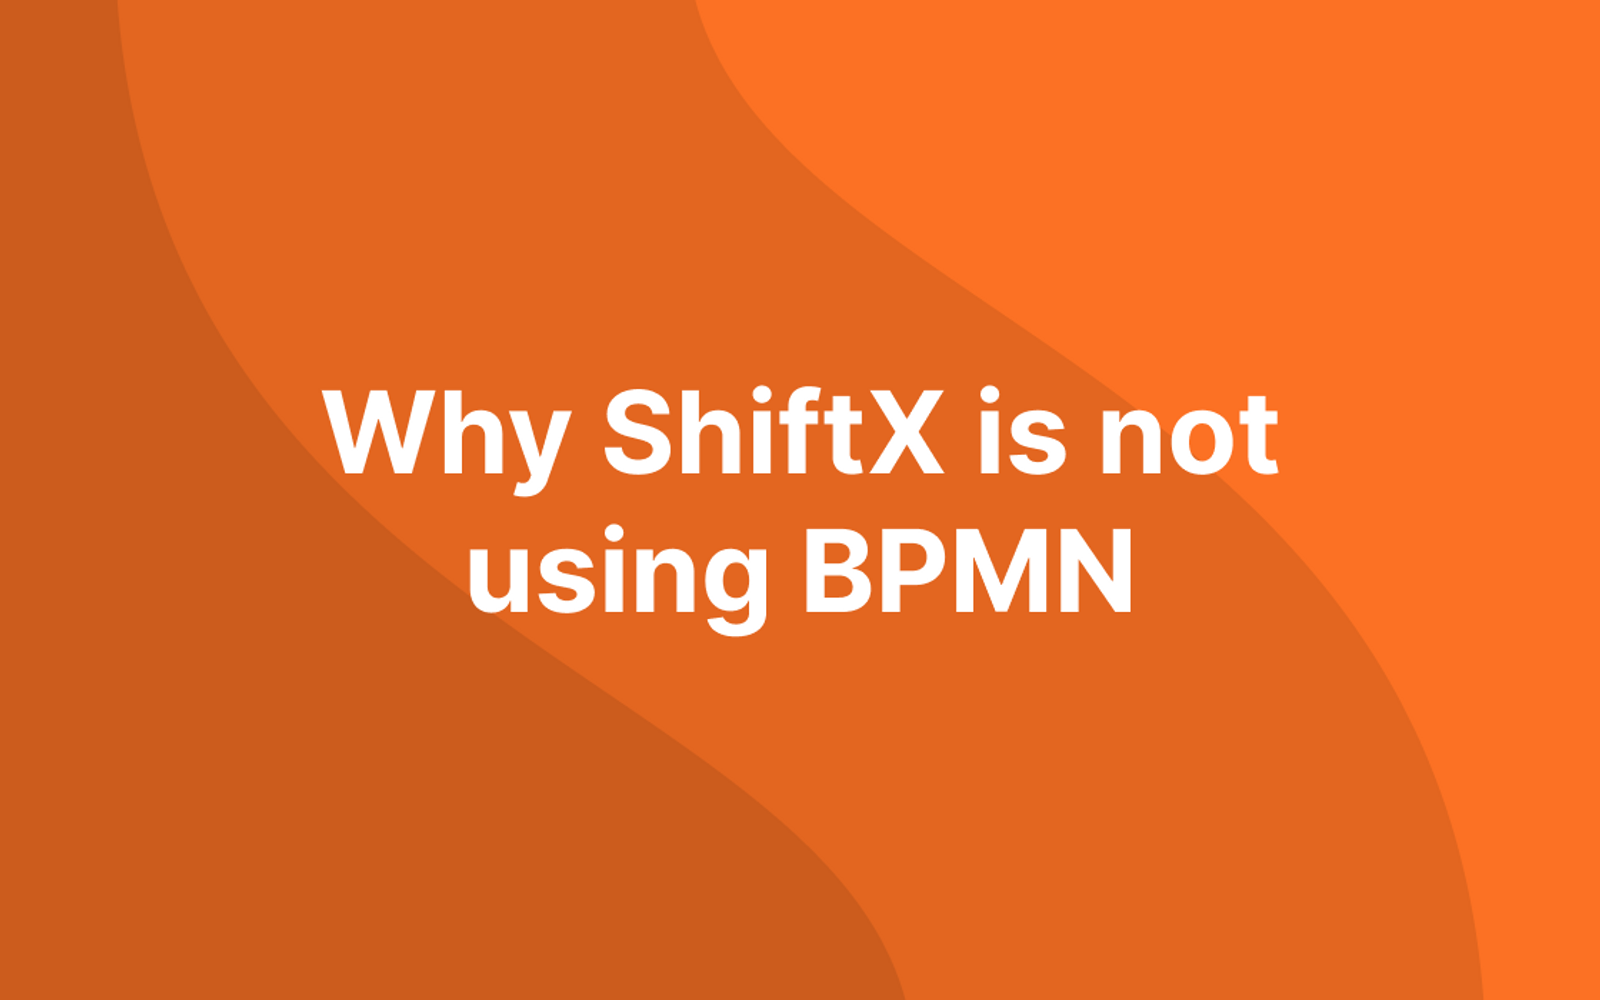 Why ShiftX is not using BPMN written in white, on an orange background